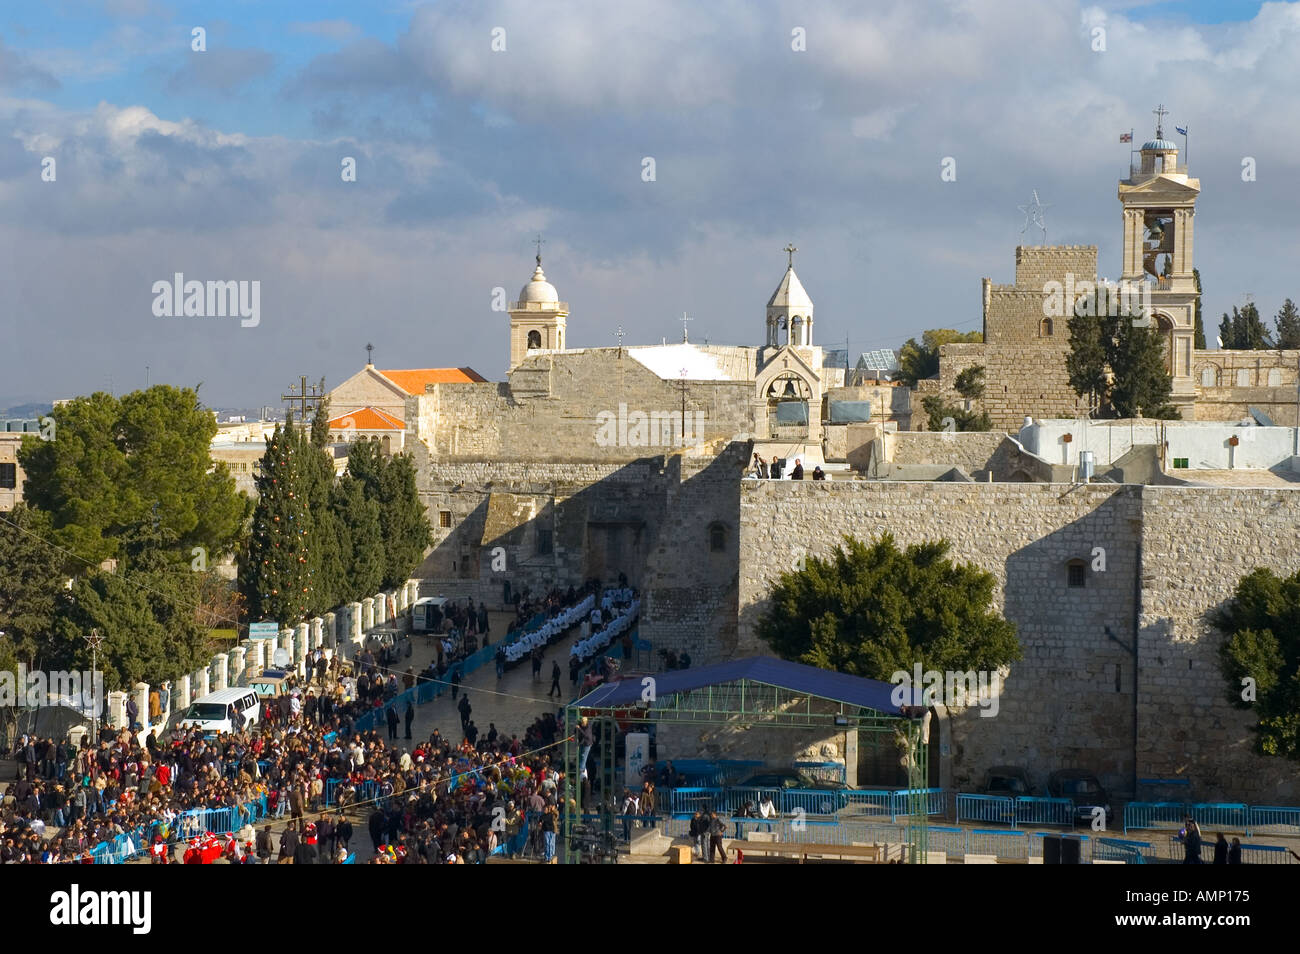 Palestinian Authority Bethlehem church of the Nativity elevated view with crowd on christmas day Stock Photo